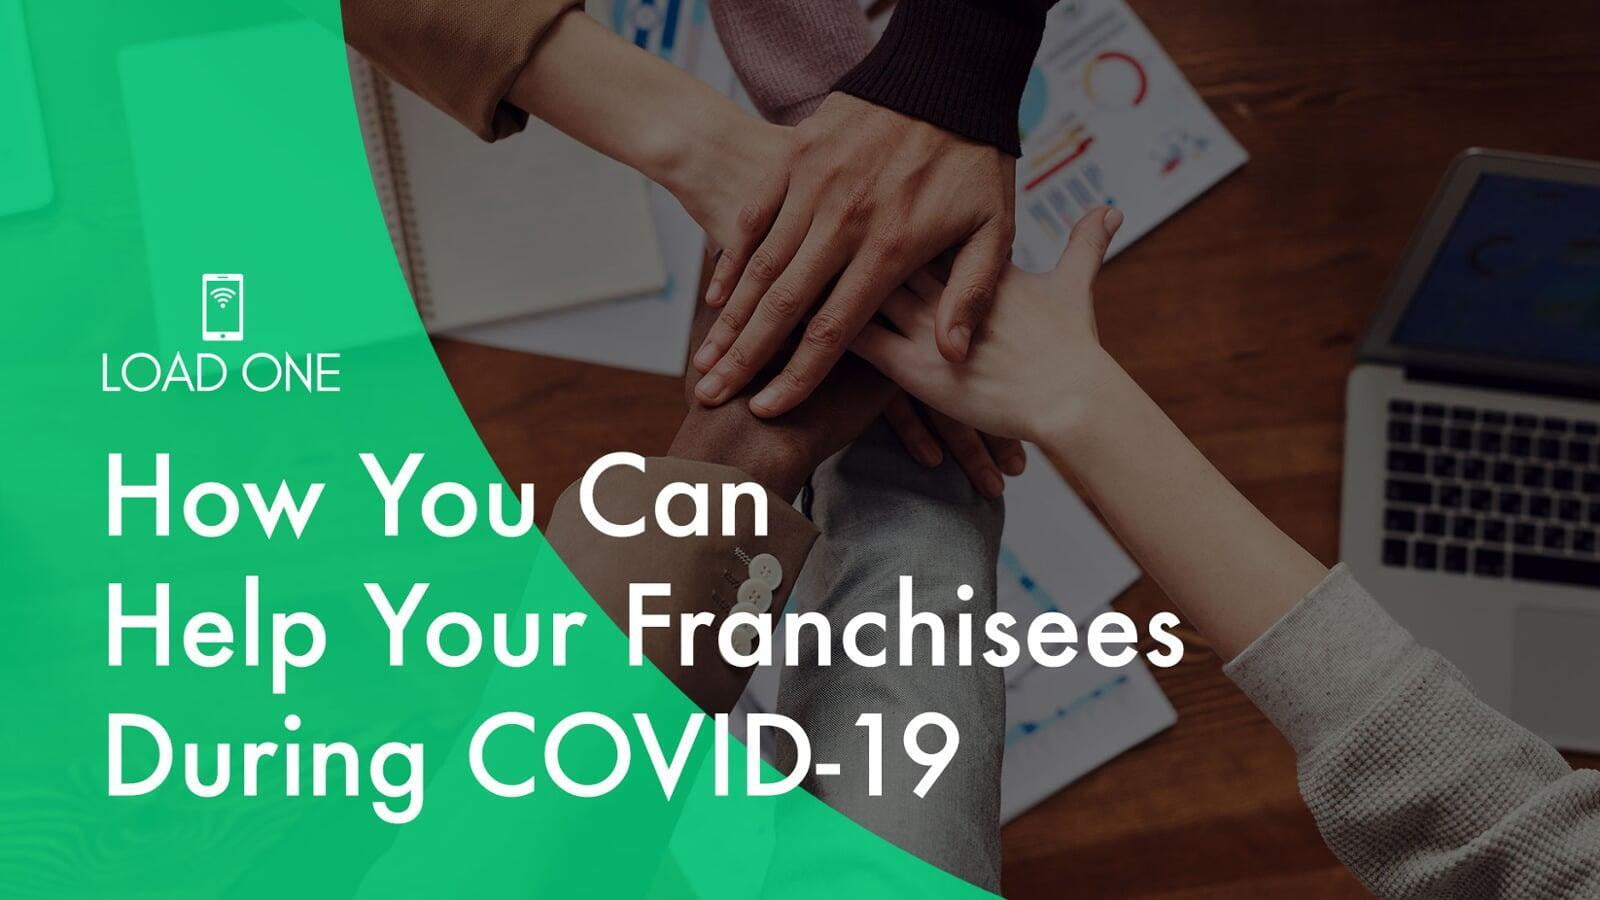 How You Can Help Your Franchisees During COVID-19